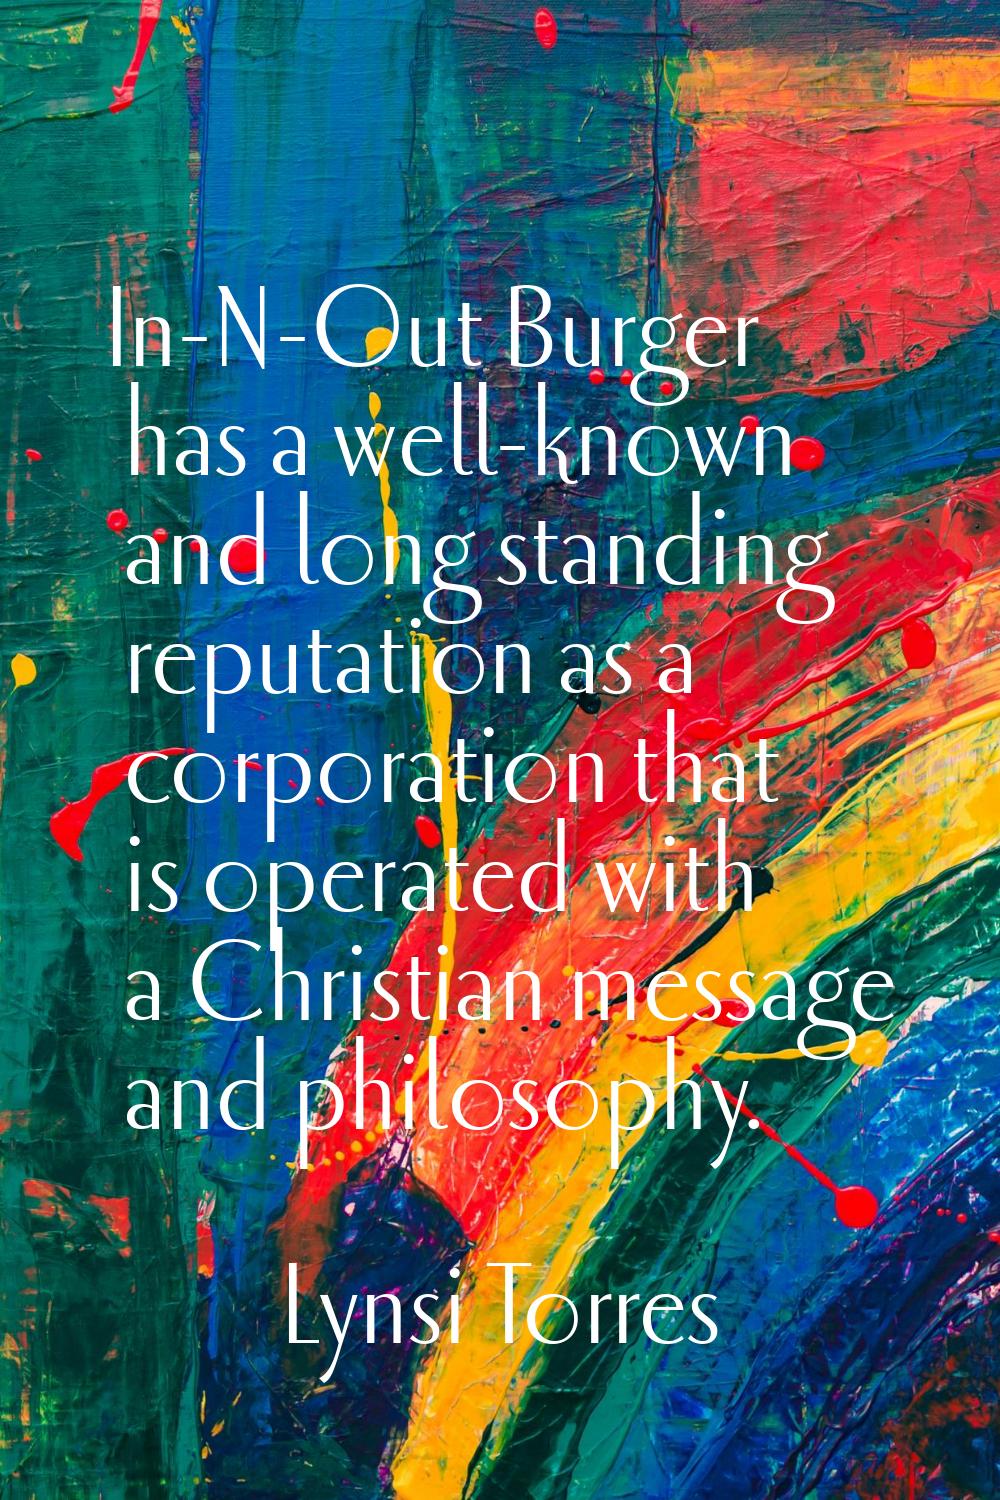 In-N-Out Burger has a well-known and long standing reputation as a corporation that is operated wit